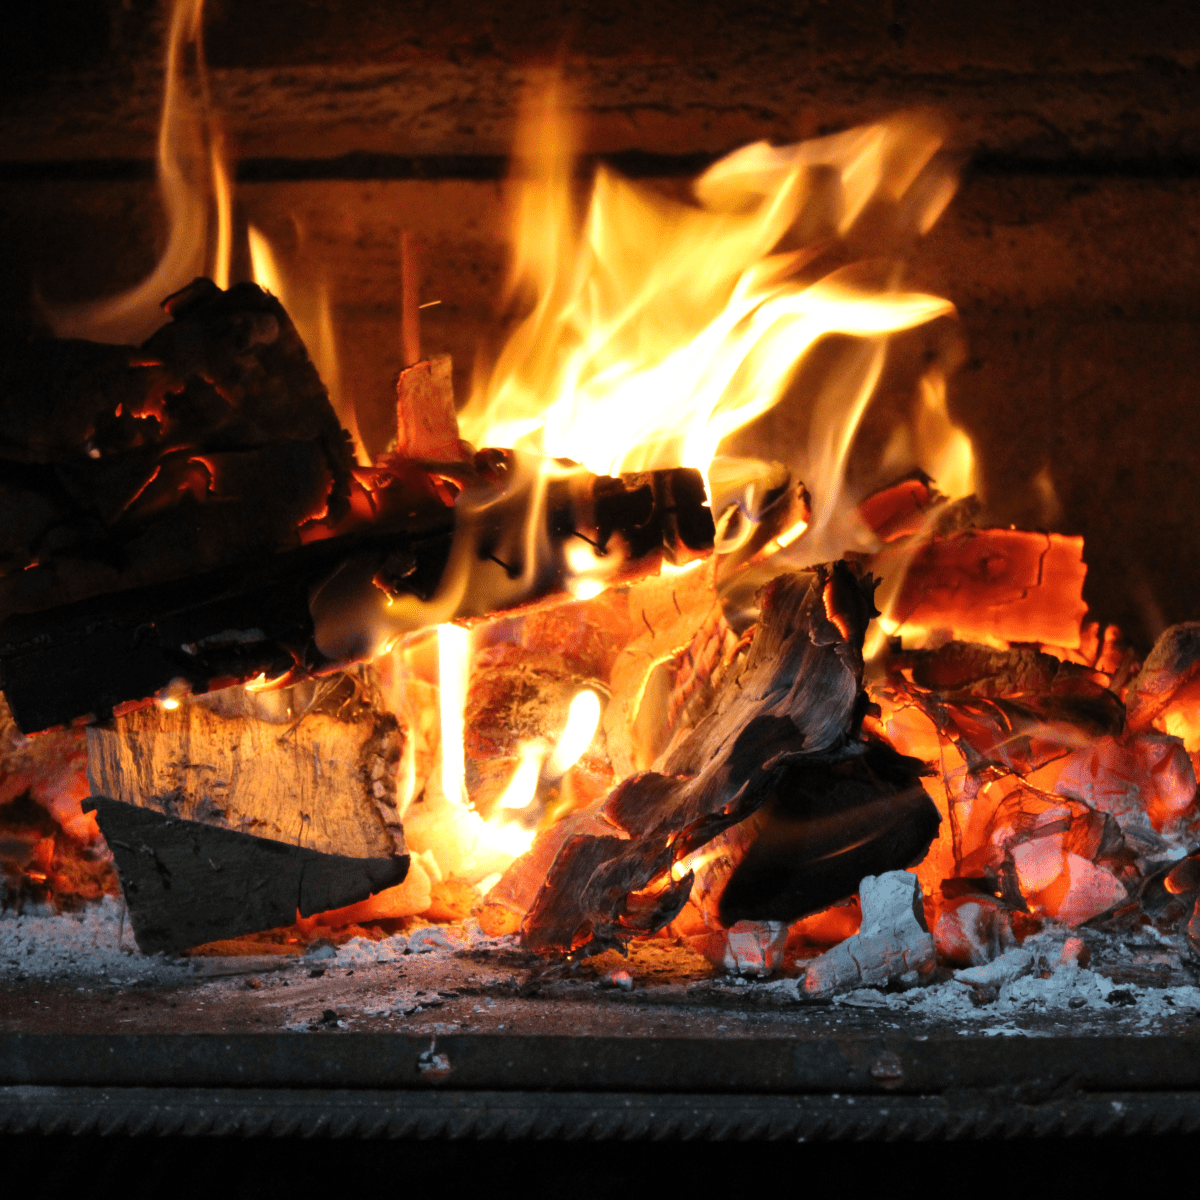 How to Make Gel Fuel for Your Ventless Fireplace: A DIY Guide - Dengarden